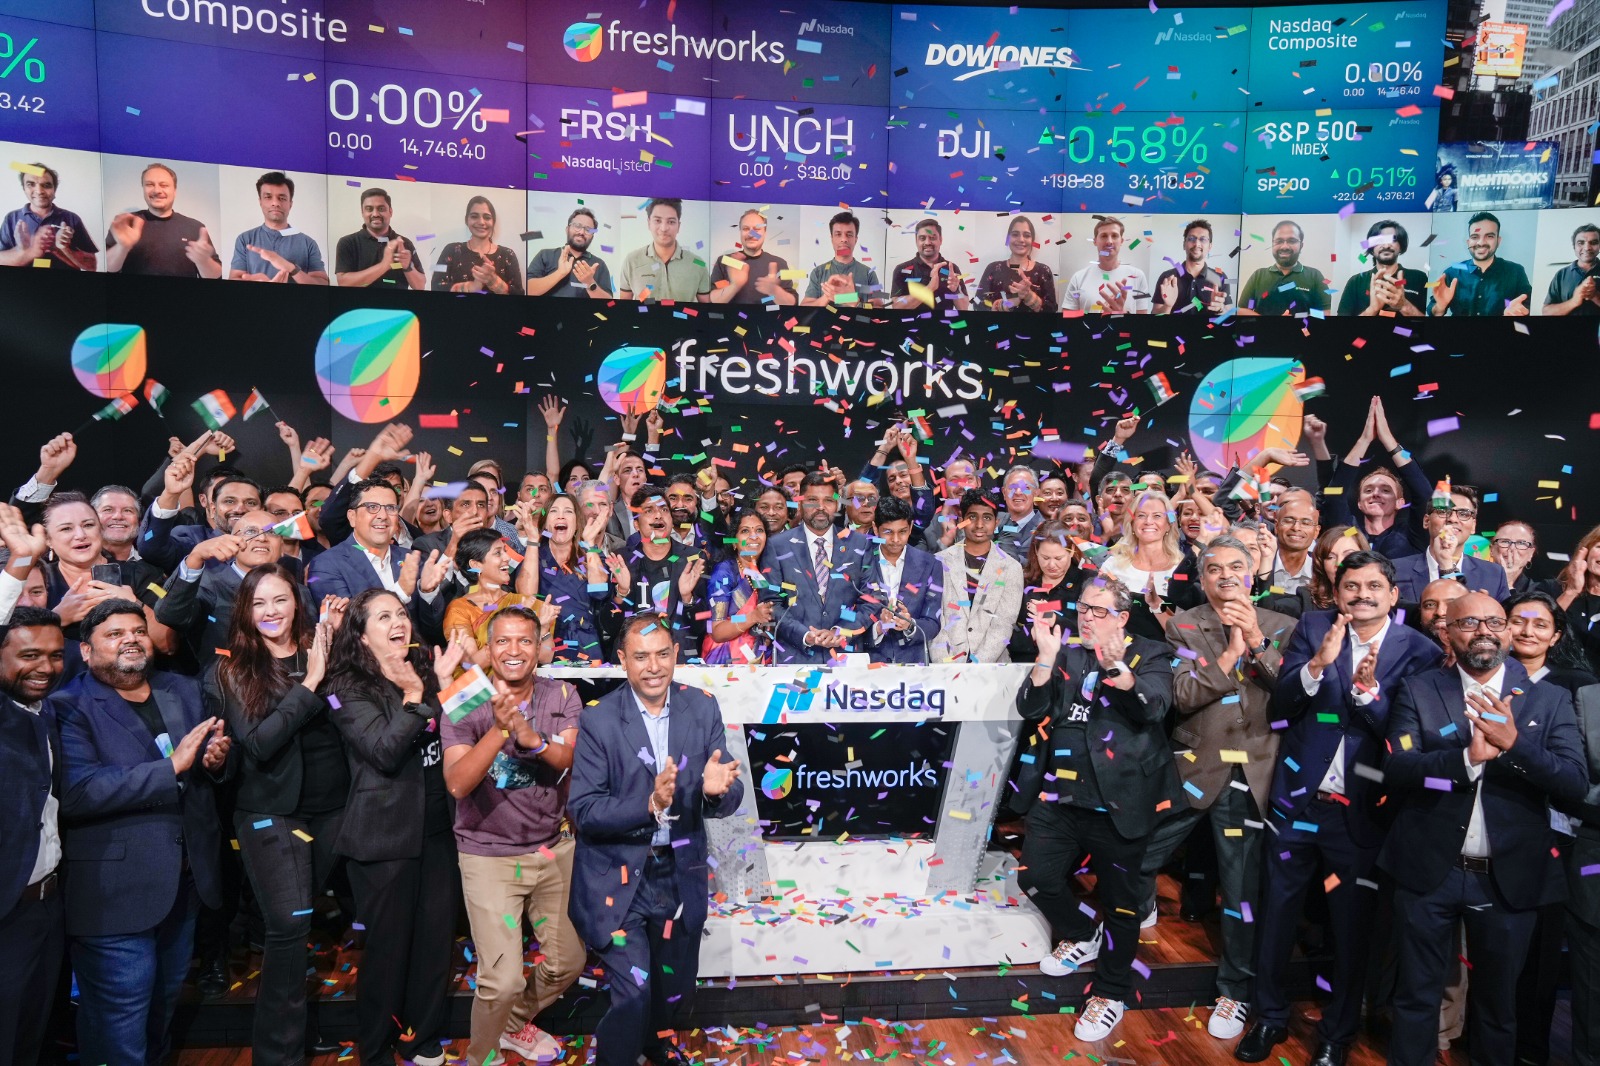 Freshworks becomes first Indian SaaS company to list shares in US after stellar debut